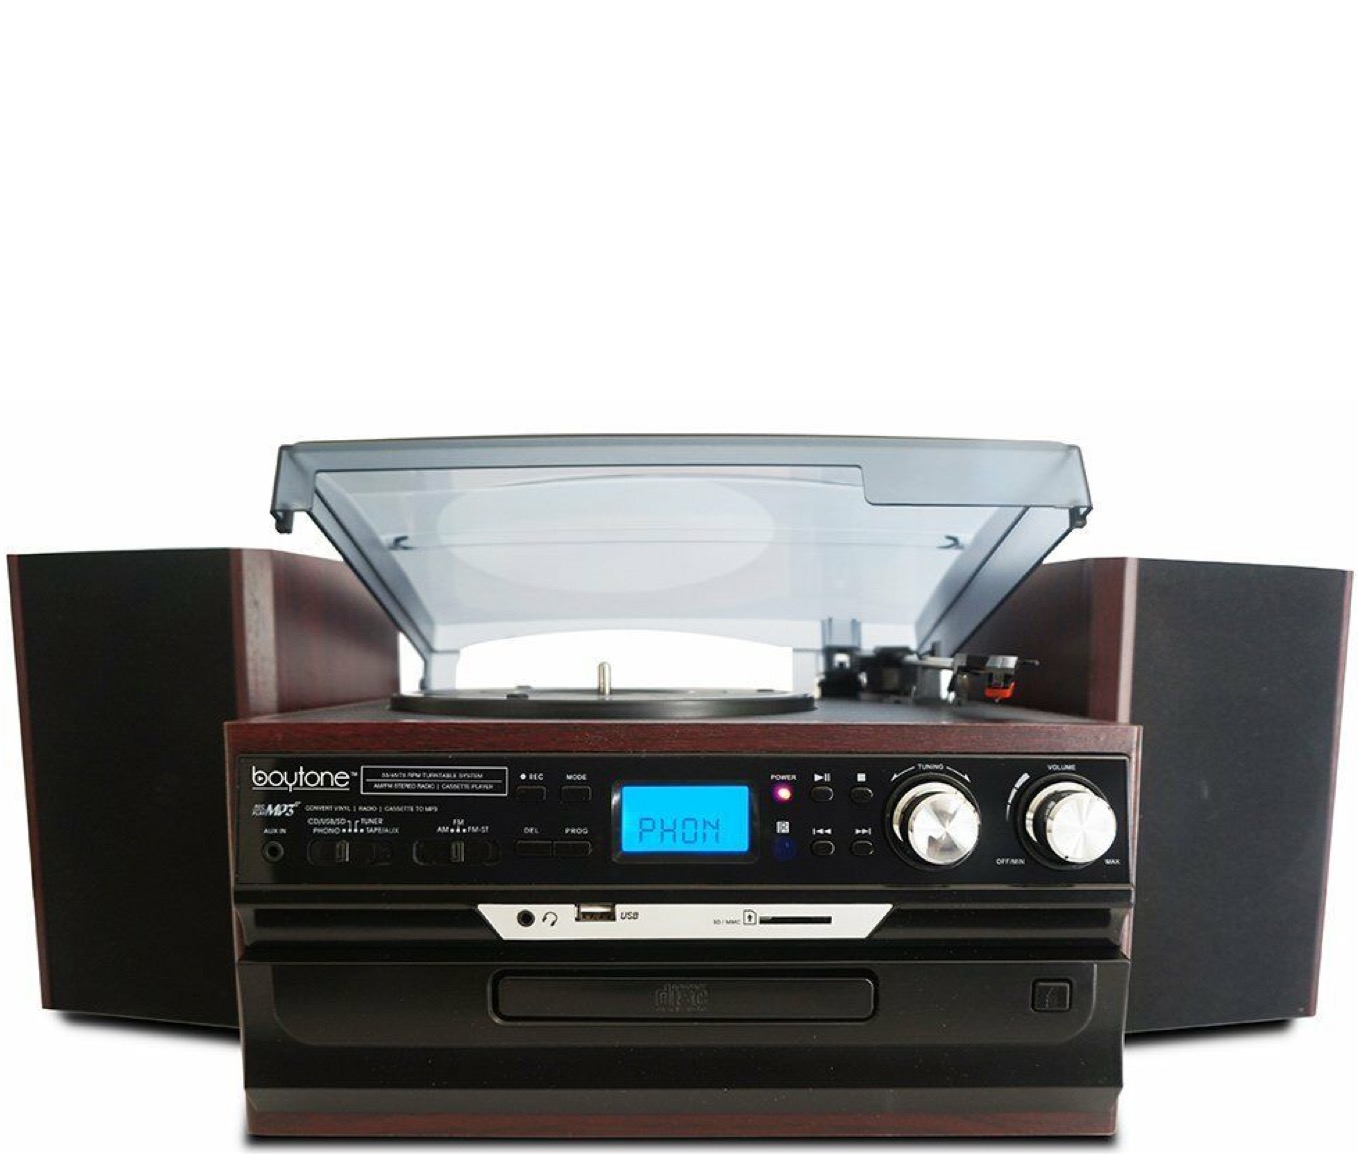 Pyle 3 Speed Stereo Turntable Record Player Cassette AM/FM Radio AUX-IN USB/SD 